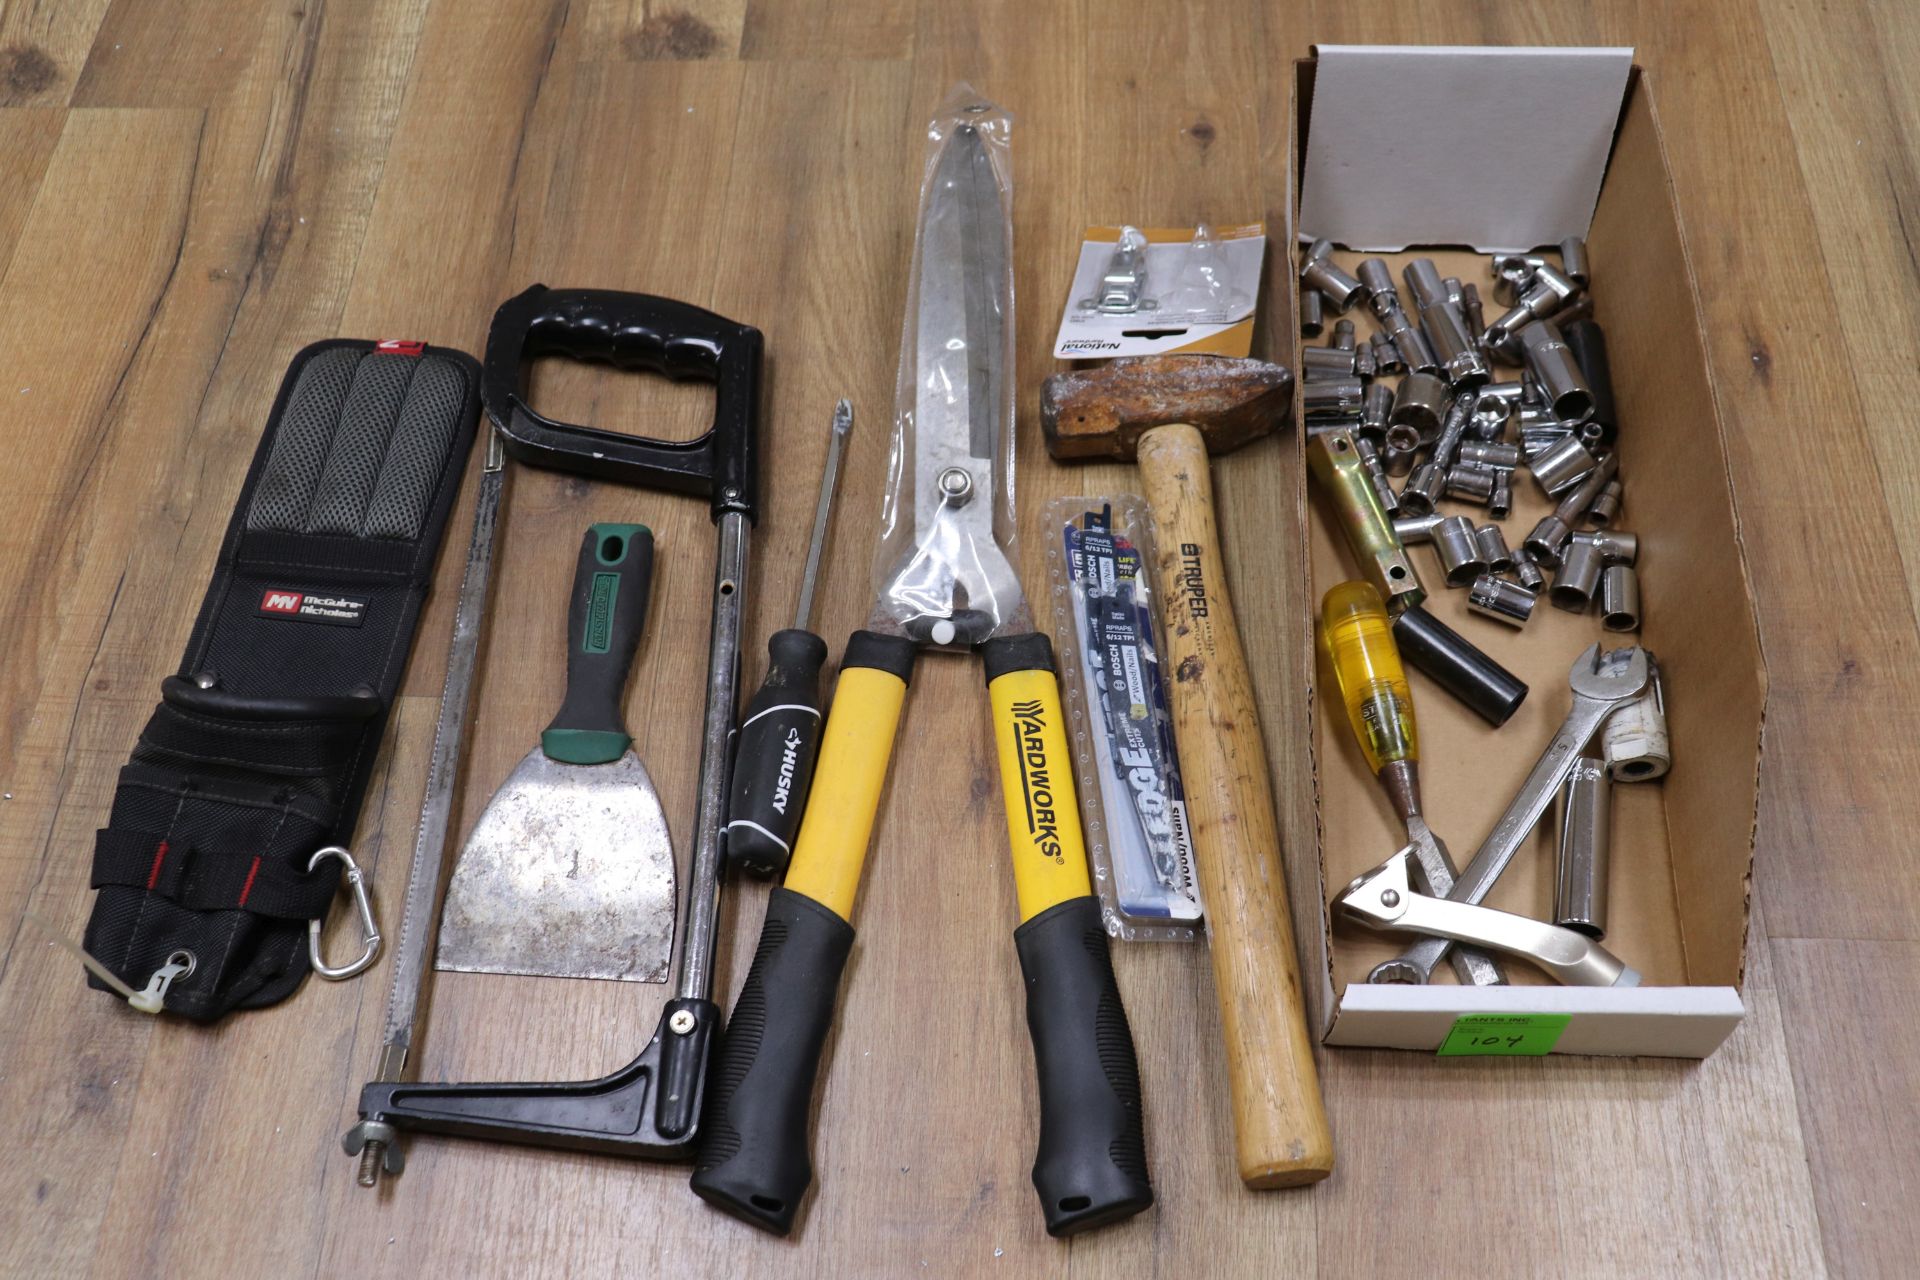 Miscellaneous sockets, hacksaw, mallet, and garden shears